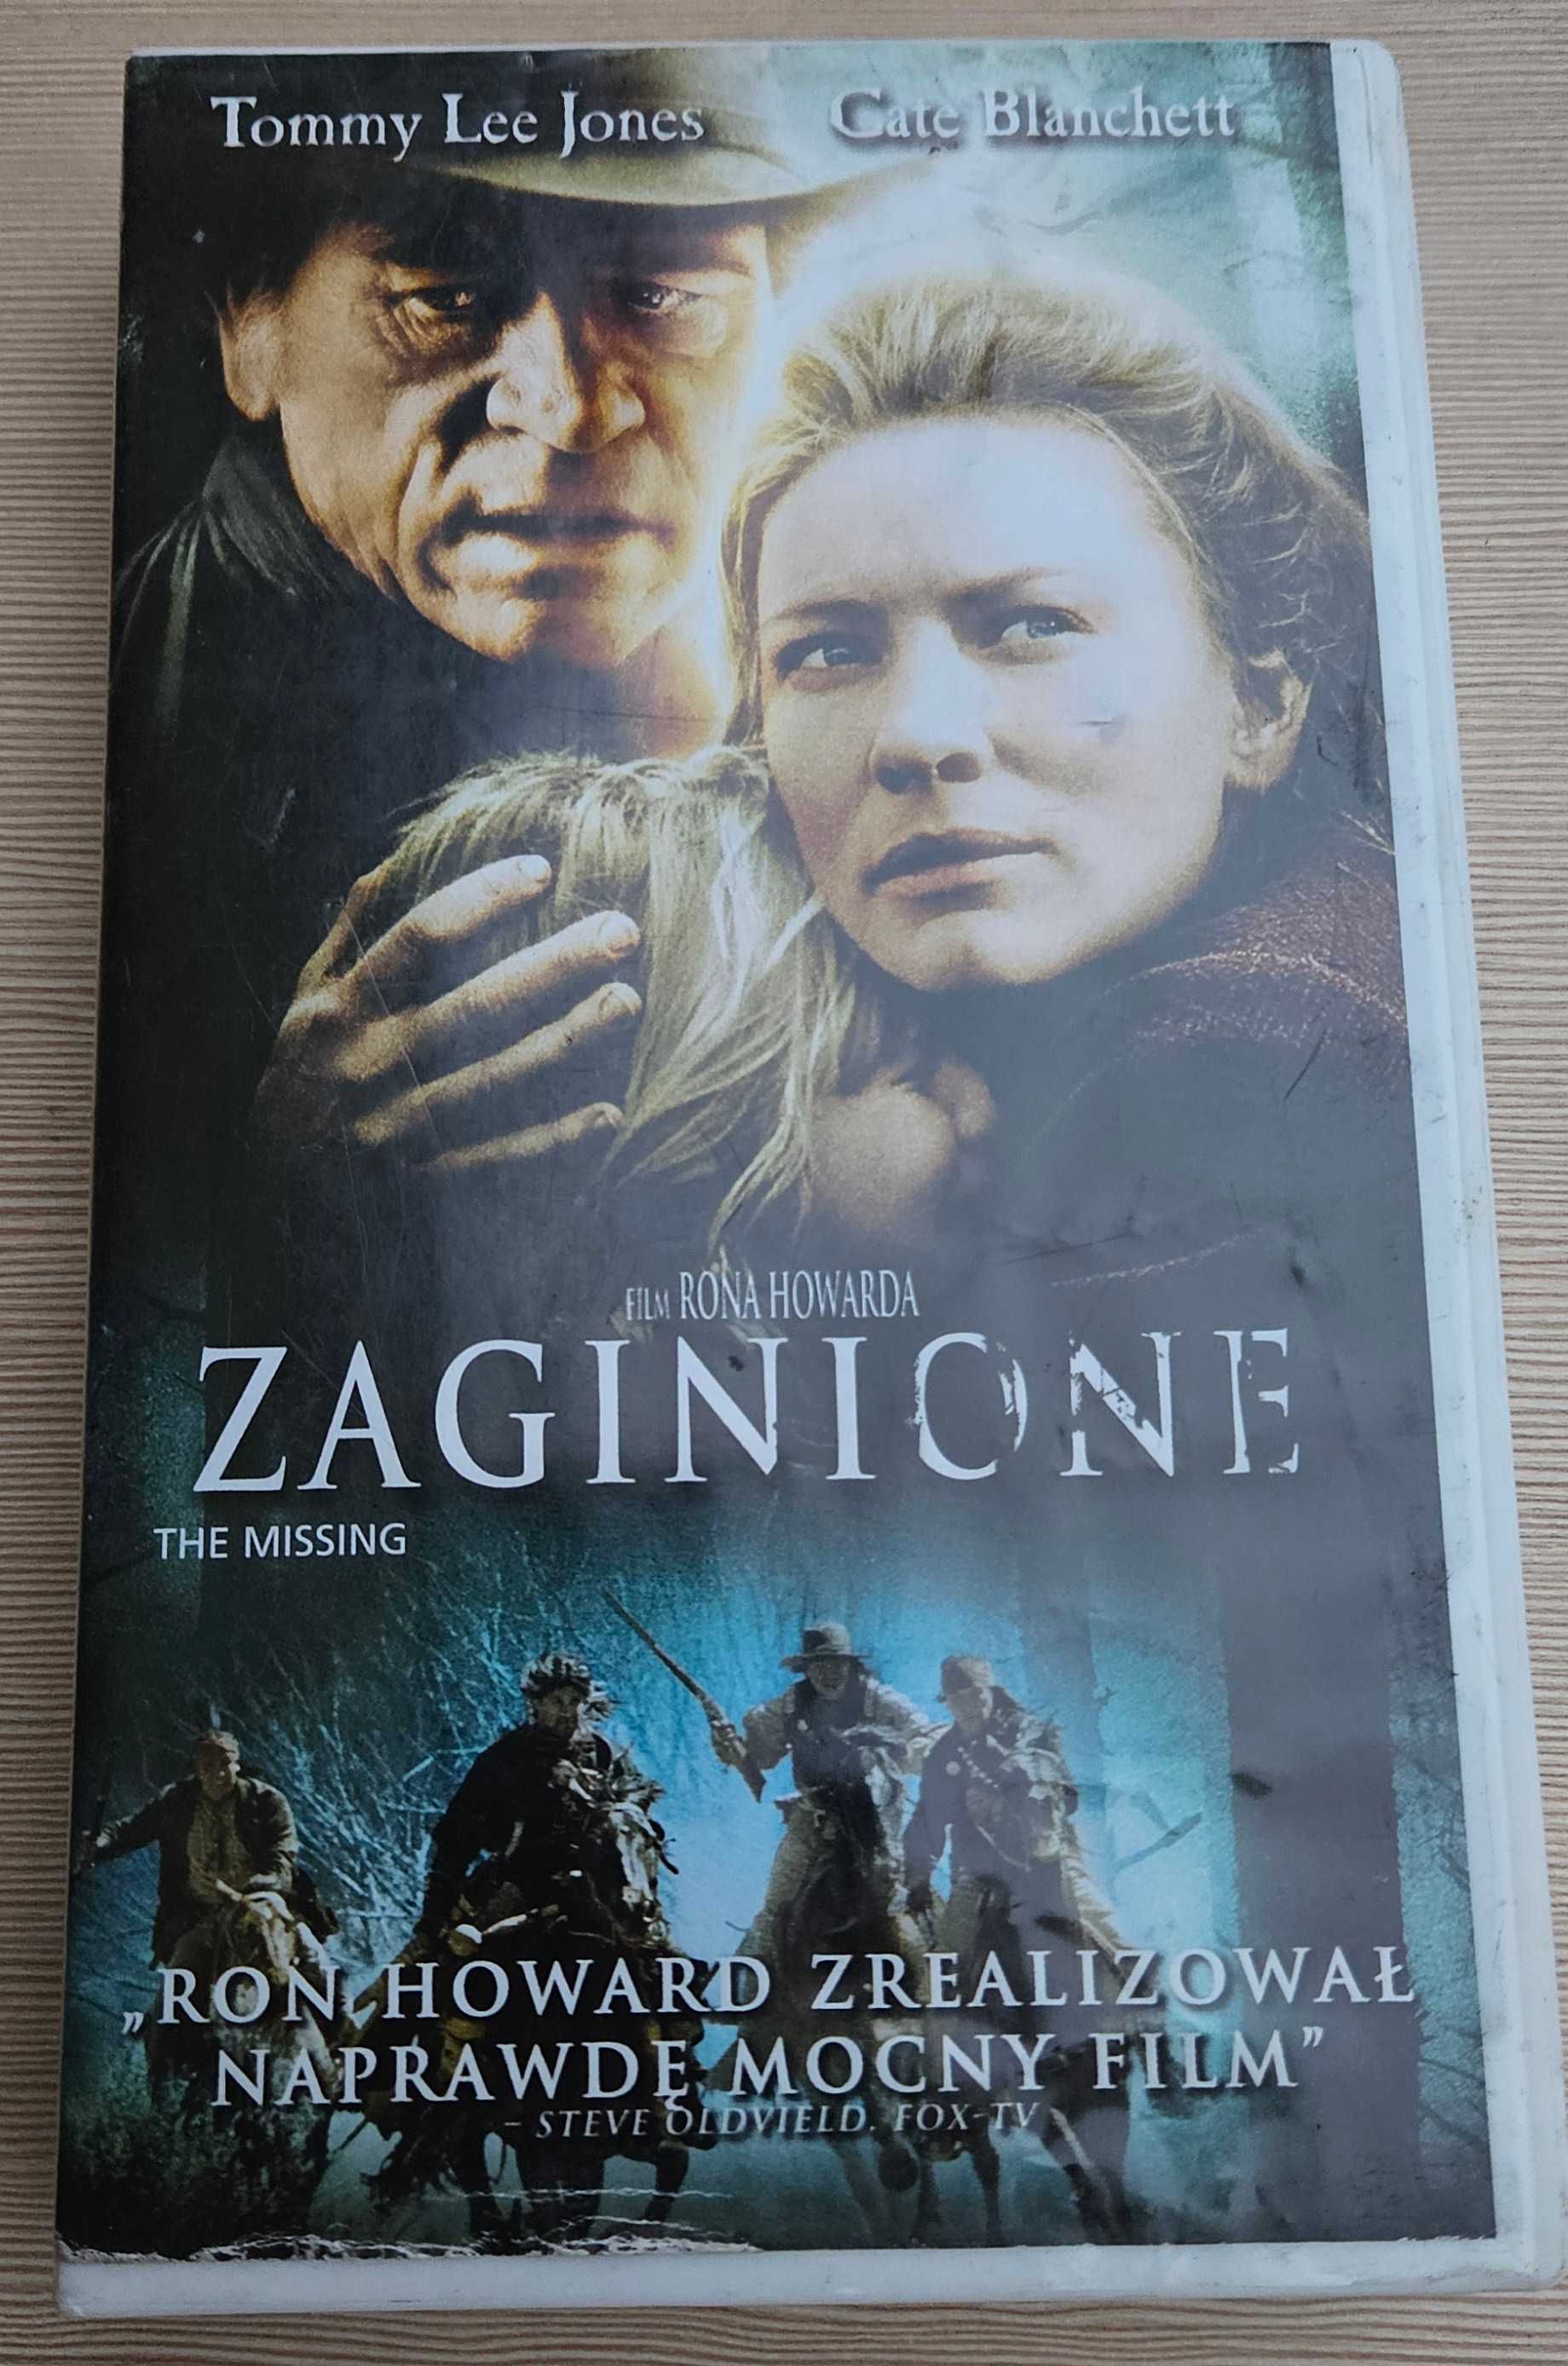 Kaseta Wideo VHS Zaginione  The Missing 2003 - Tommy Lee Jones,